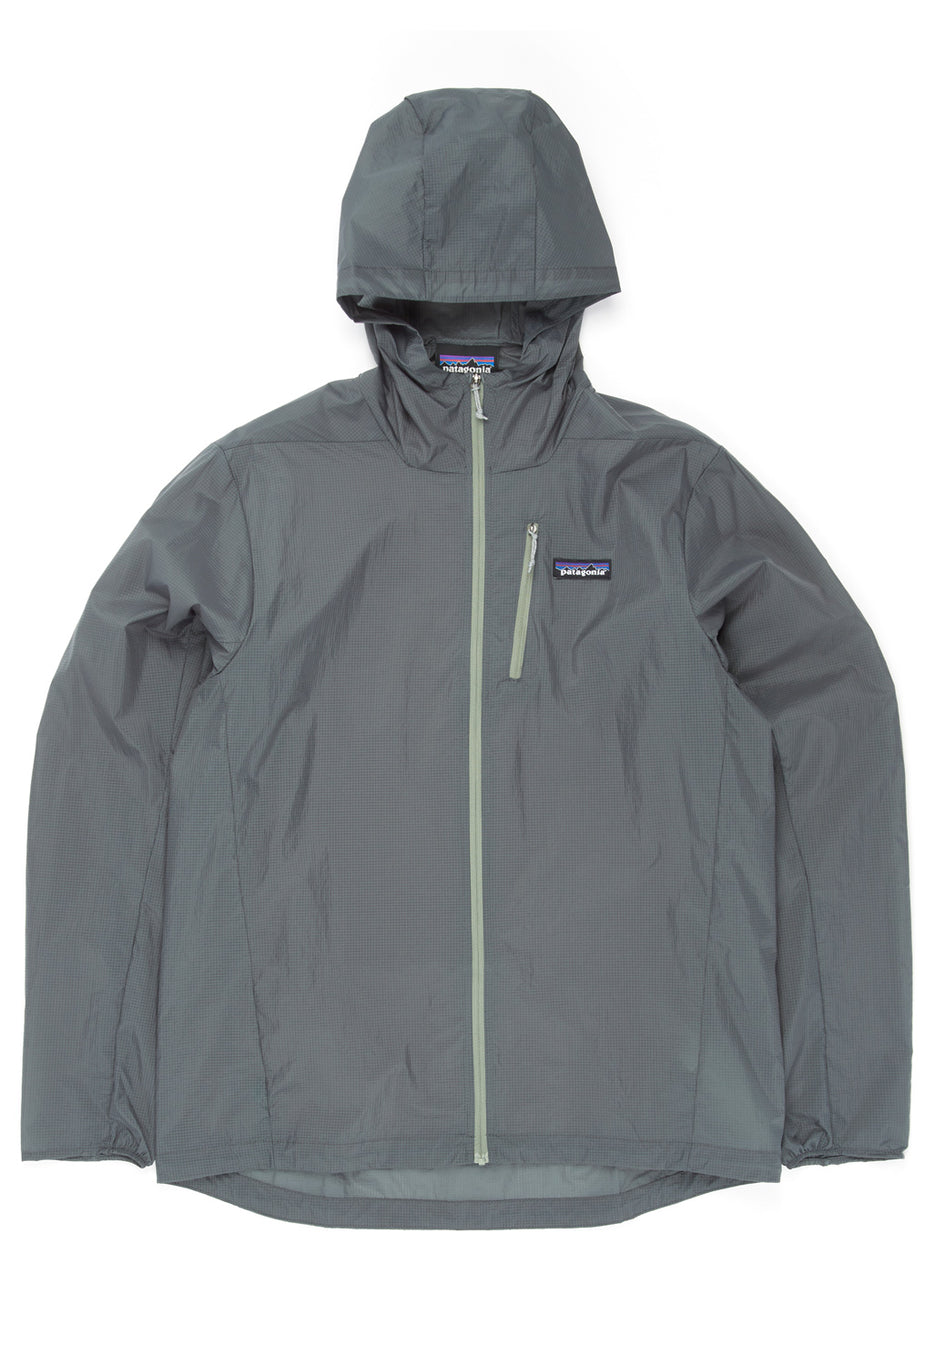 Patagonia Clothing & Equipment - Outsiders Store – Outsiders Store UK